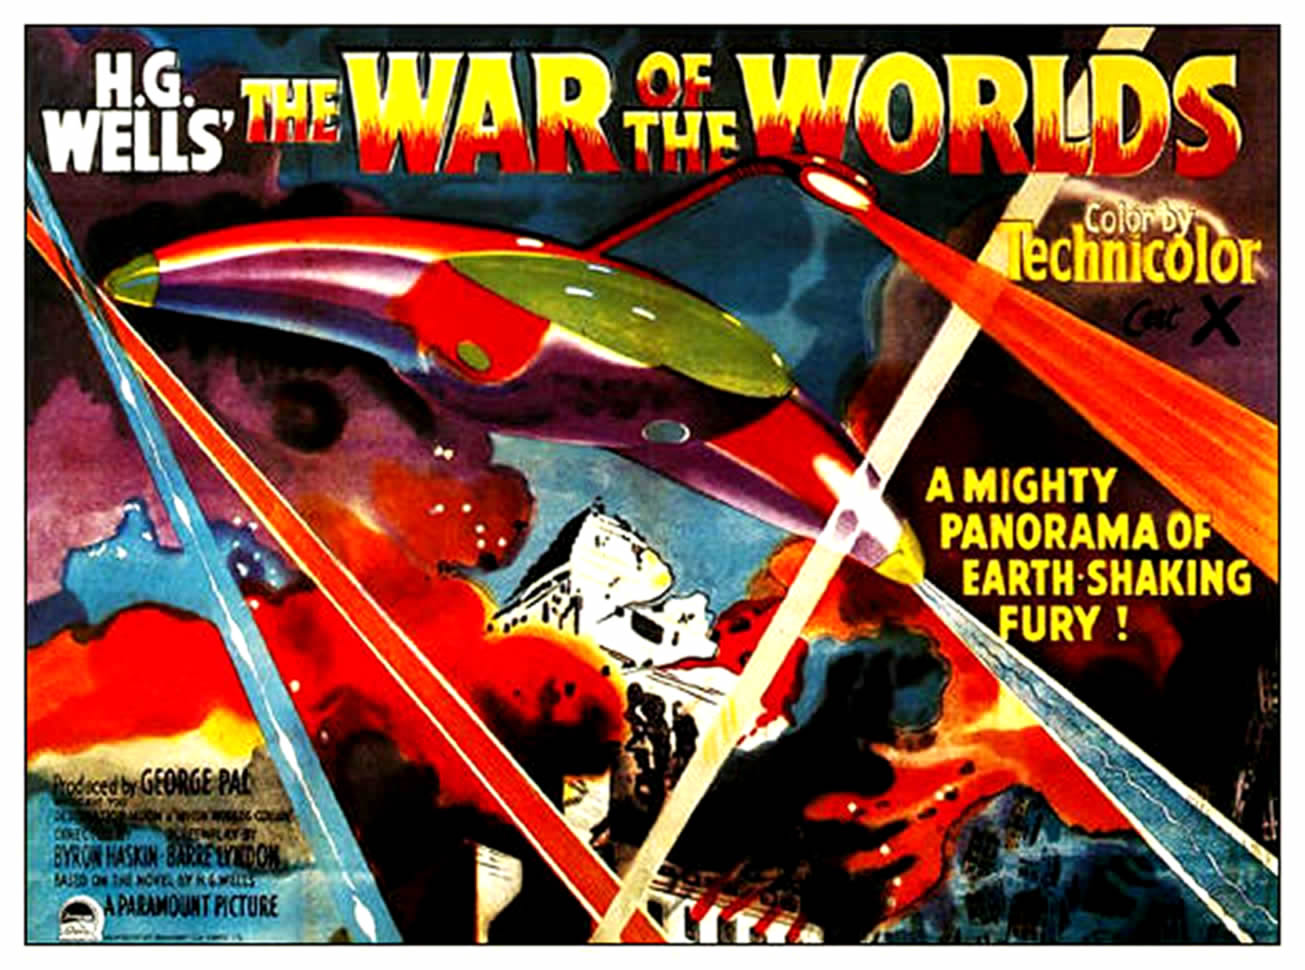 http://ayay.co.uk/backgrounds/b_movie_posters/alien_invasion/WAR-OF-THE-WORLDS-2.jpg